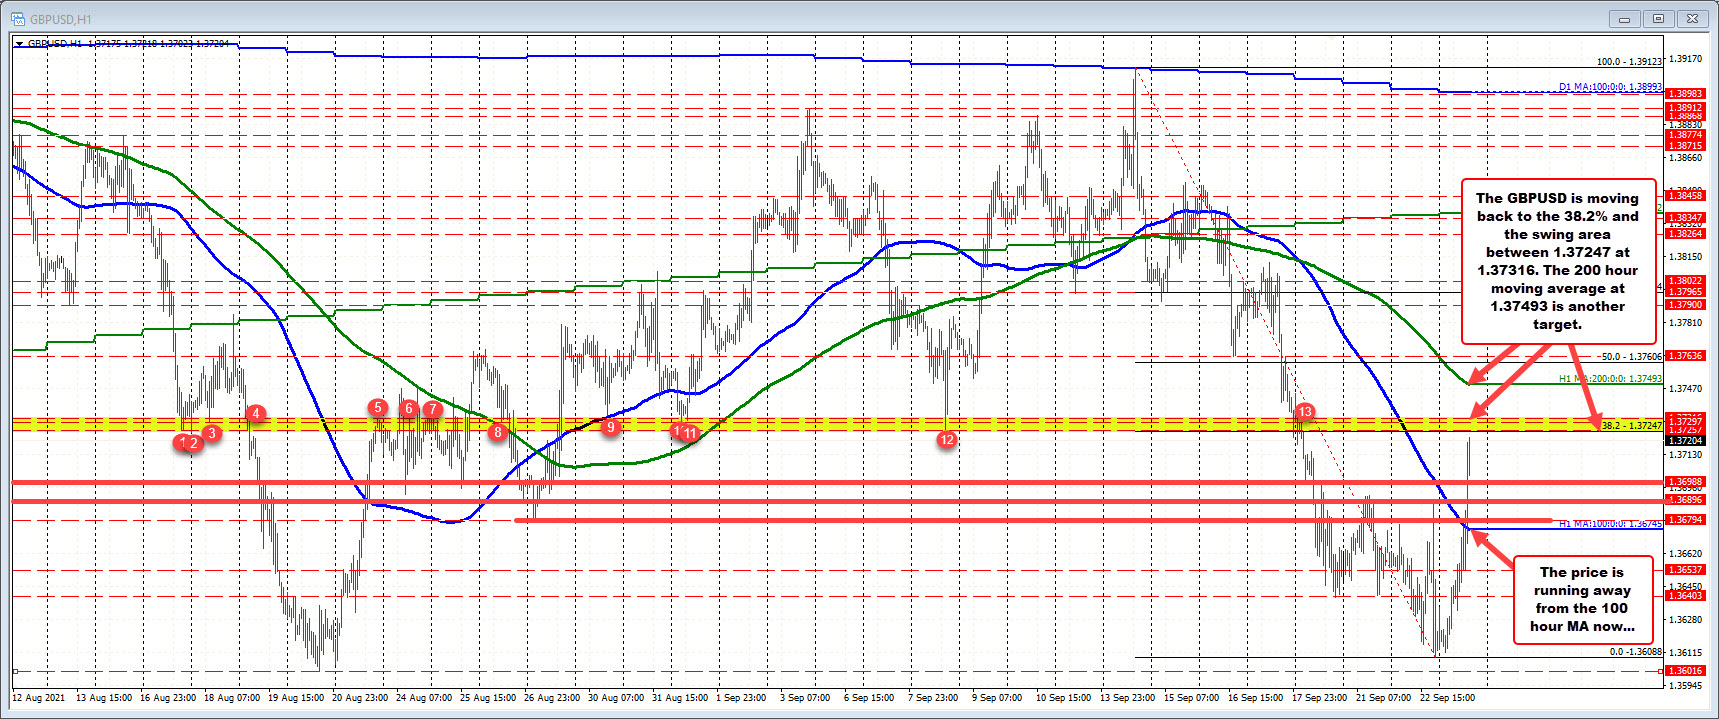 38.2% retracement and swing area between 1.37257 and 1.37316_